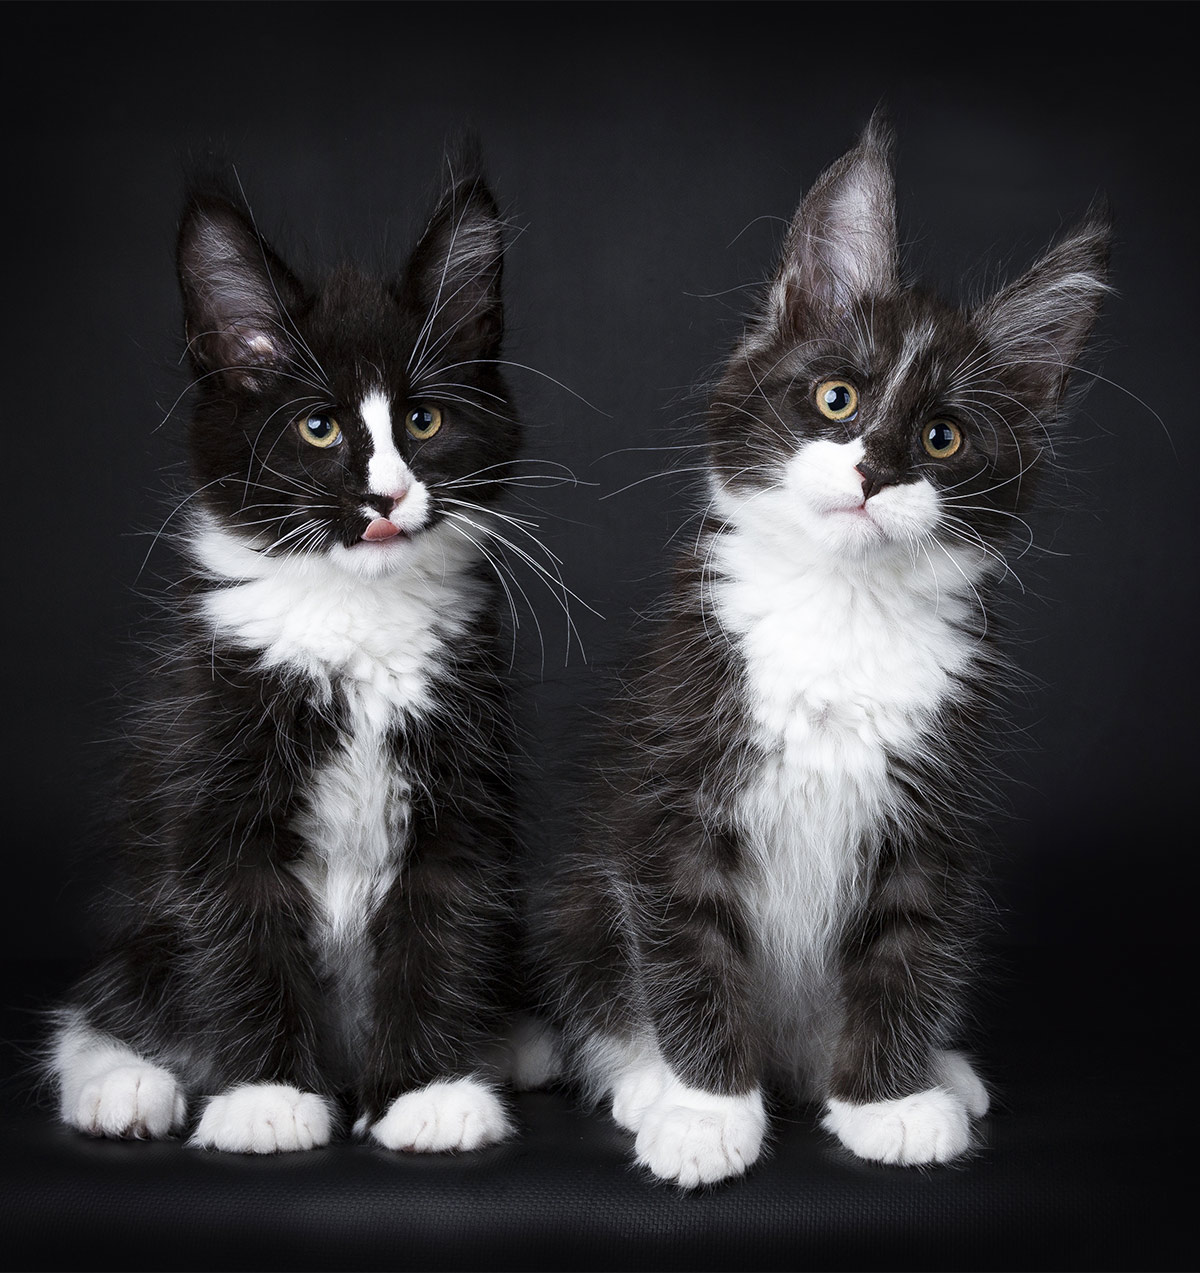 Explore Our Stunning Collection of Maine Coon Cat Photos - Yeudon